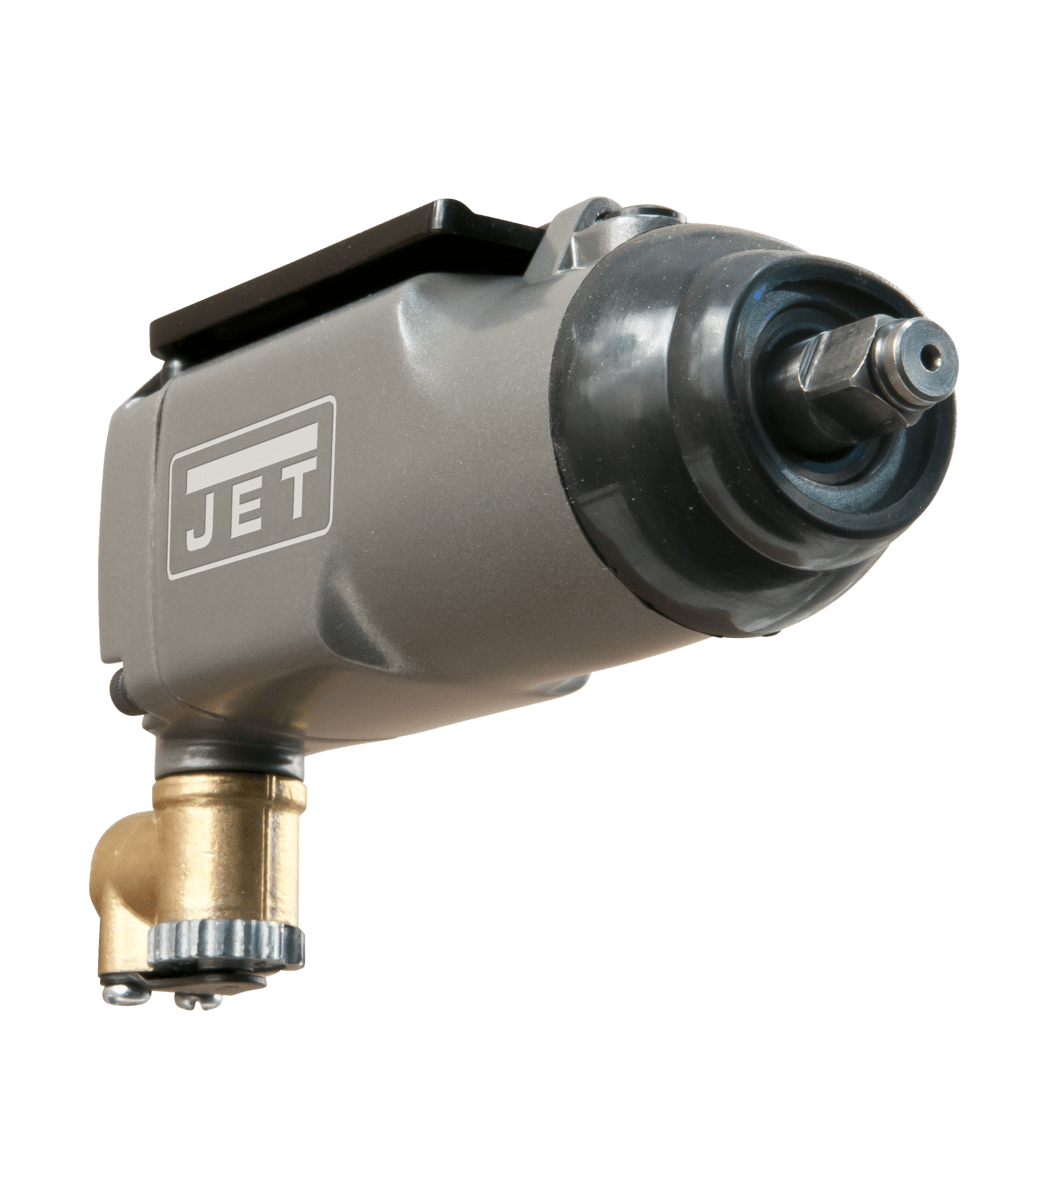 8" Butterfly Impact Wrench - Jet